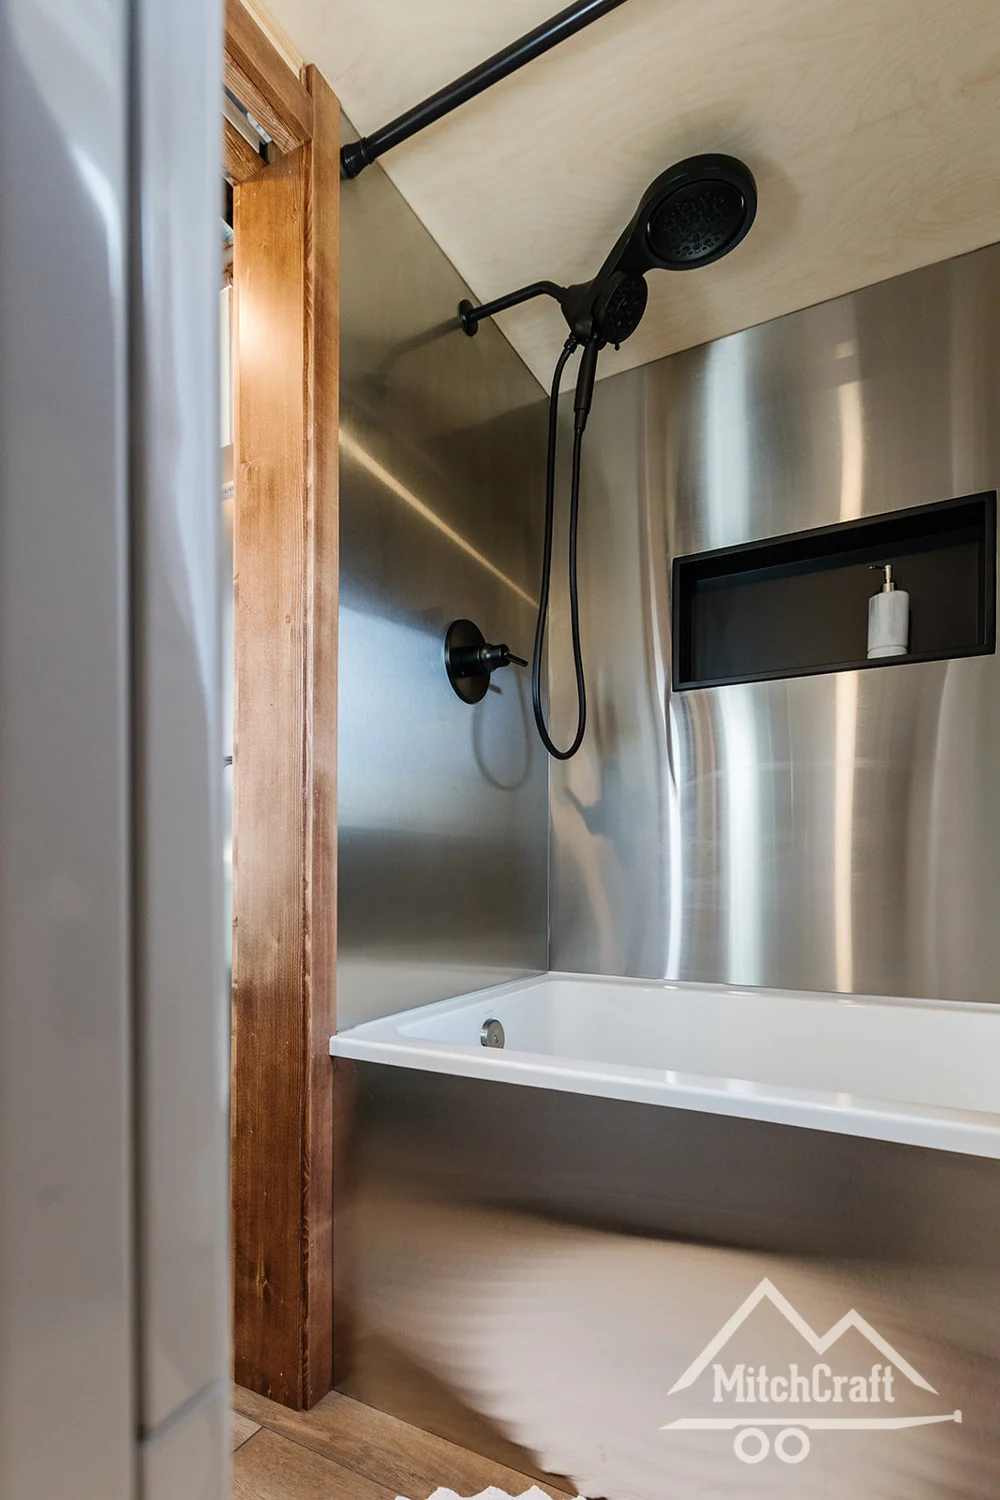 Stainless Steel Shower - Nicole's 16x8' Tiny House by MitchCraft Tiny Homes